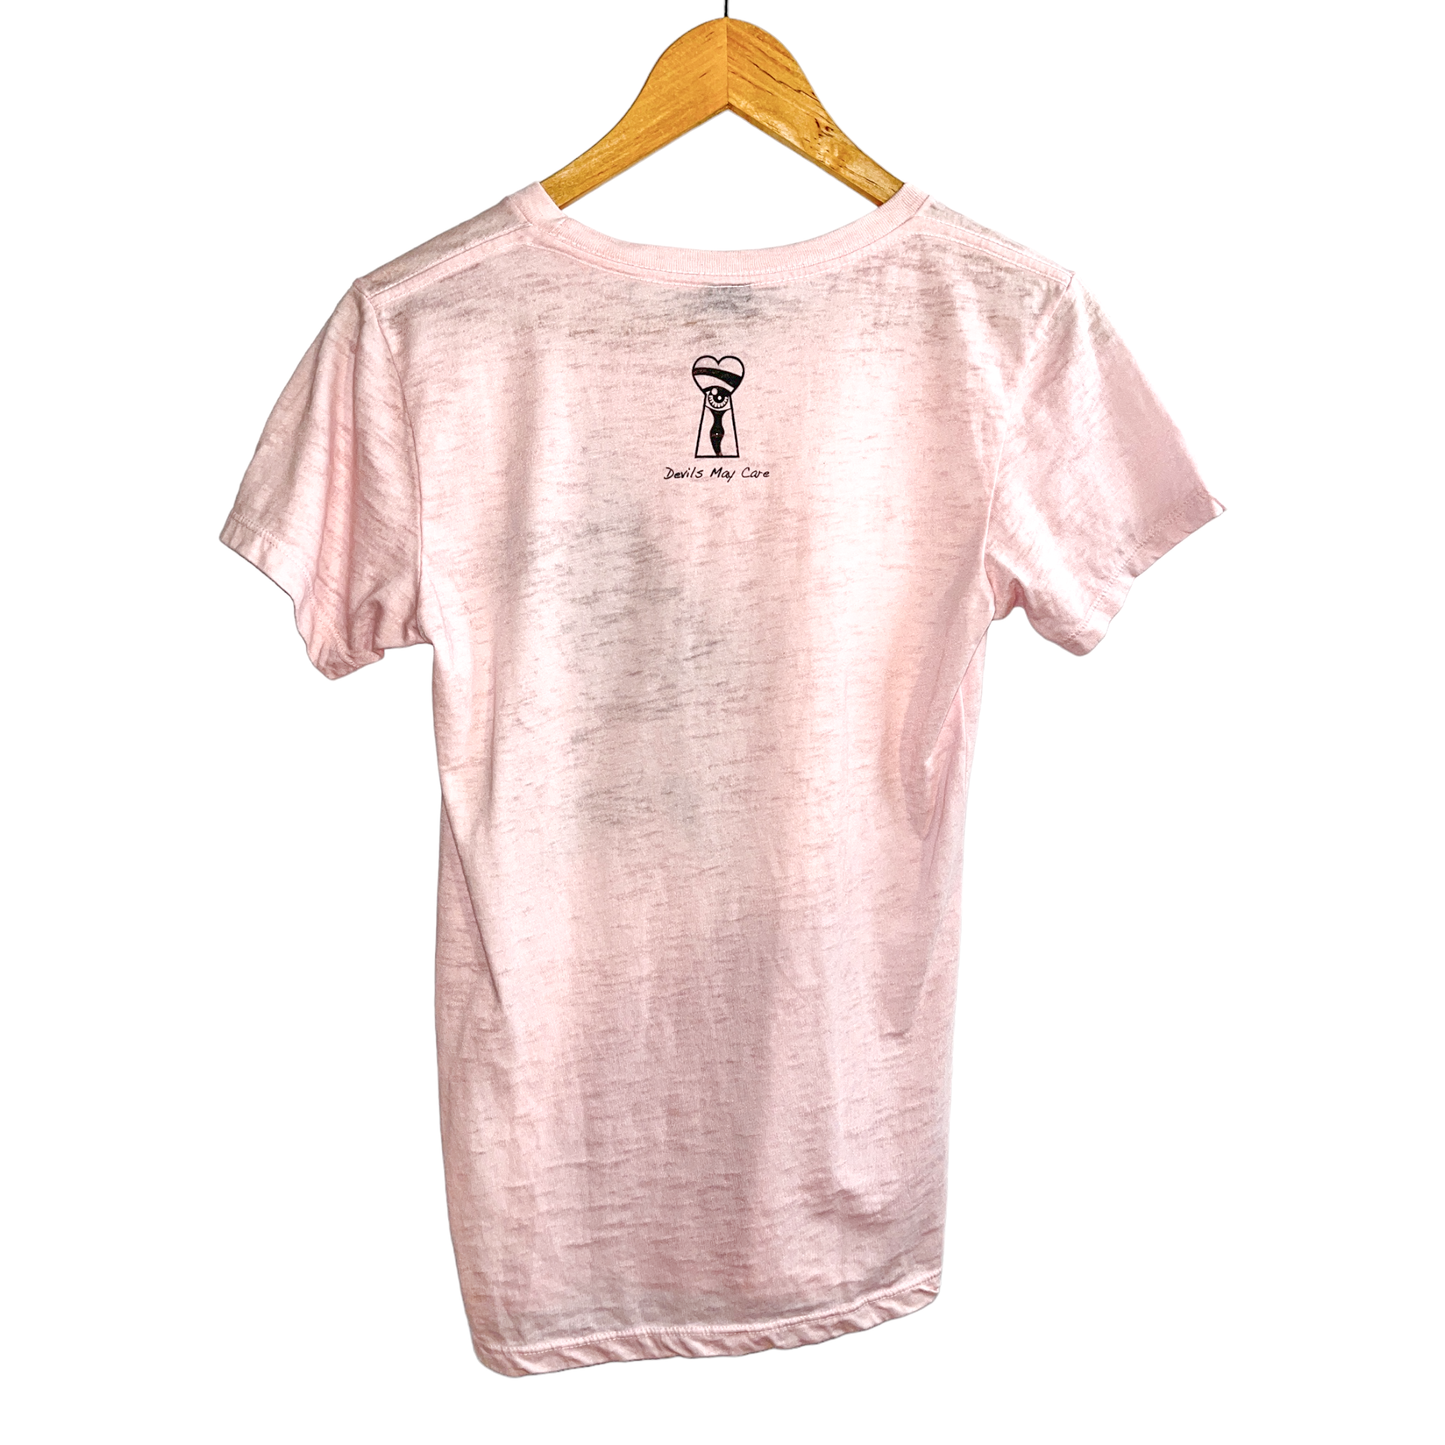 Porn Star - Pink Crew Neck T-shirt -Size SM - by Devils May Care